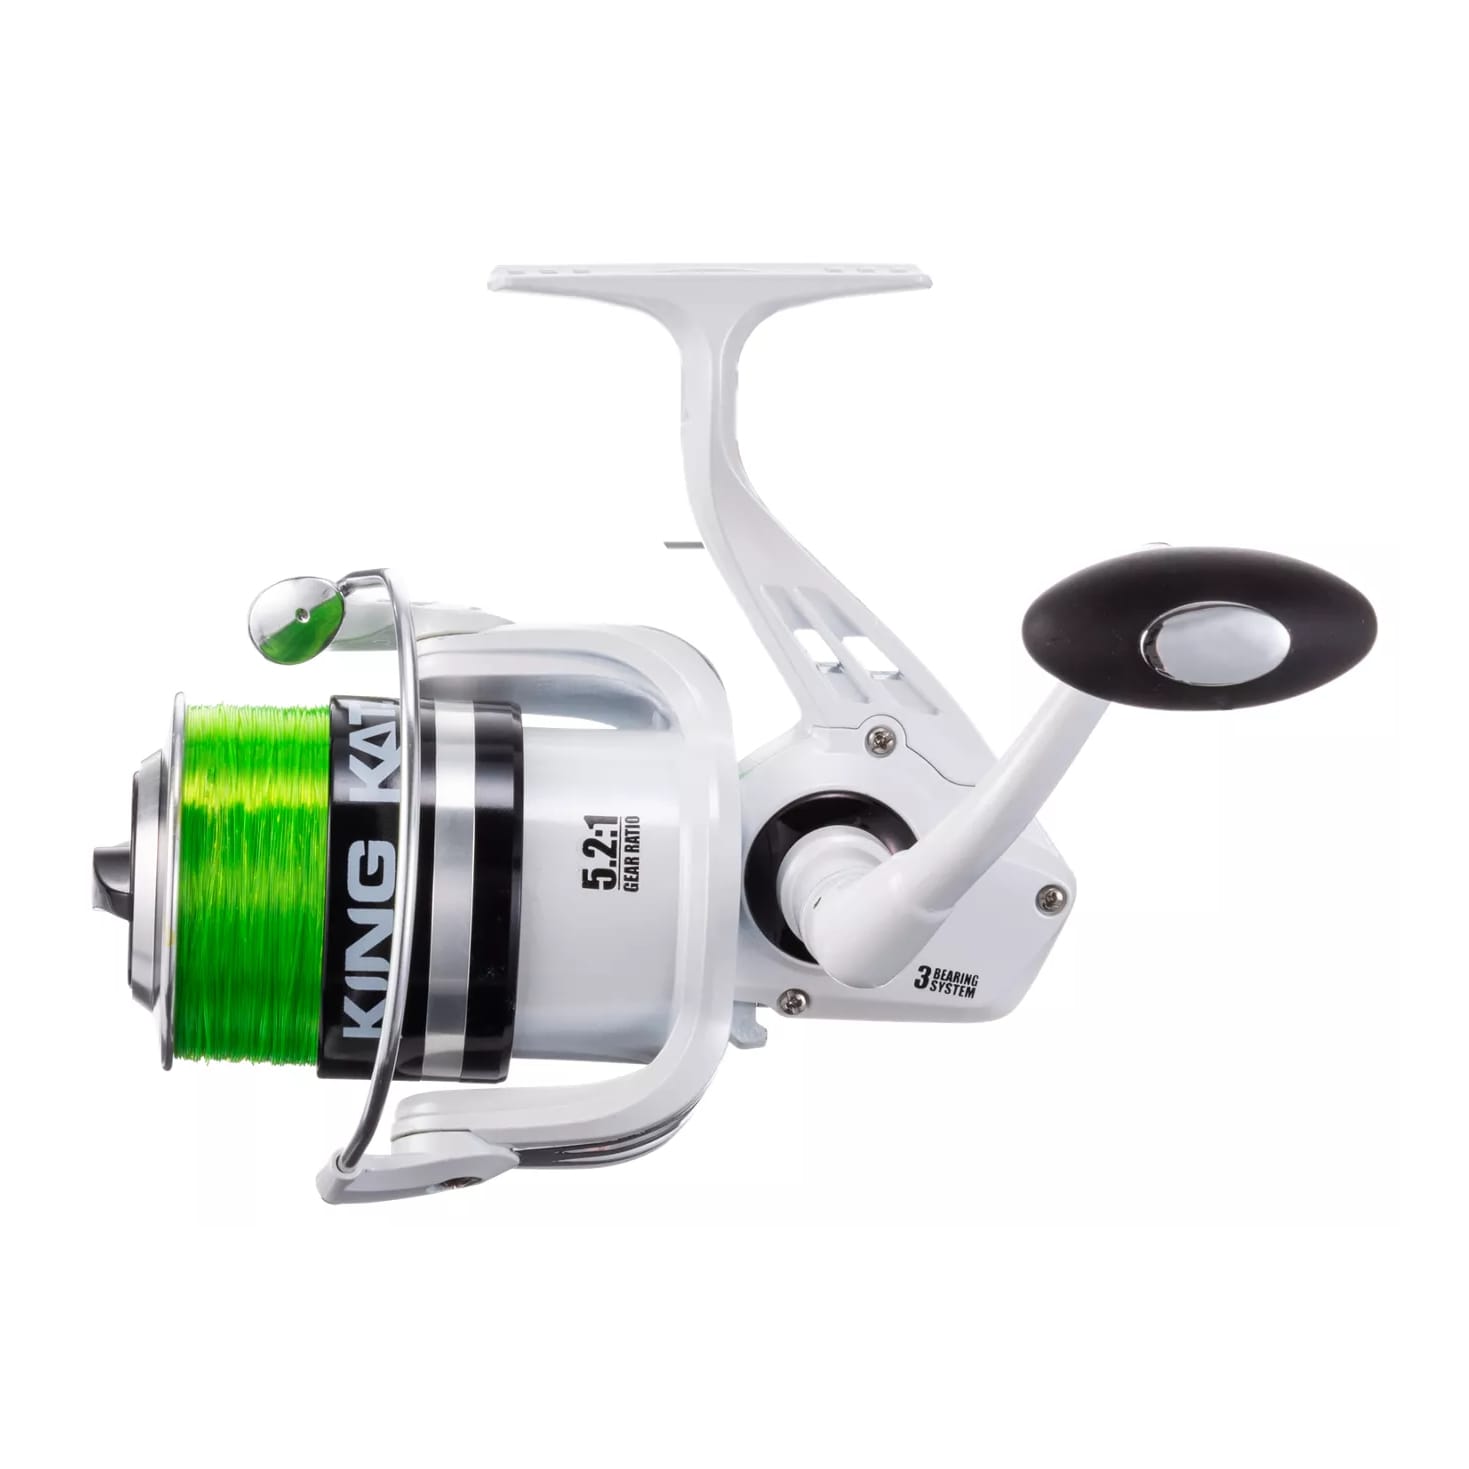 Some of my favorite @Lew's Fishing reels are on sale at @bassproshops!